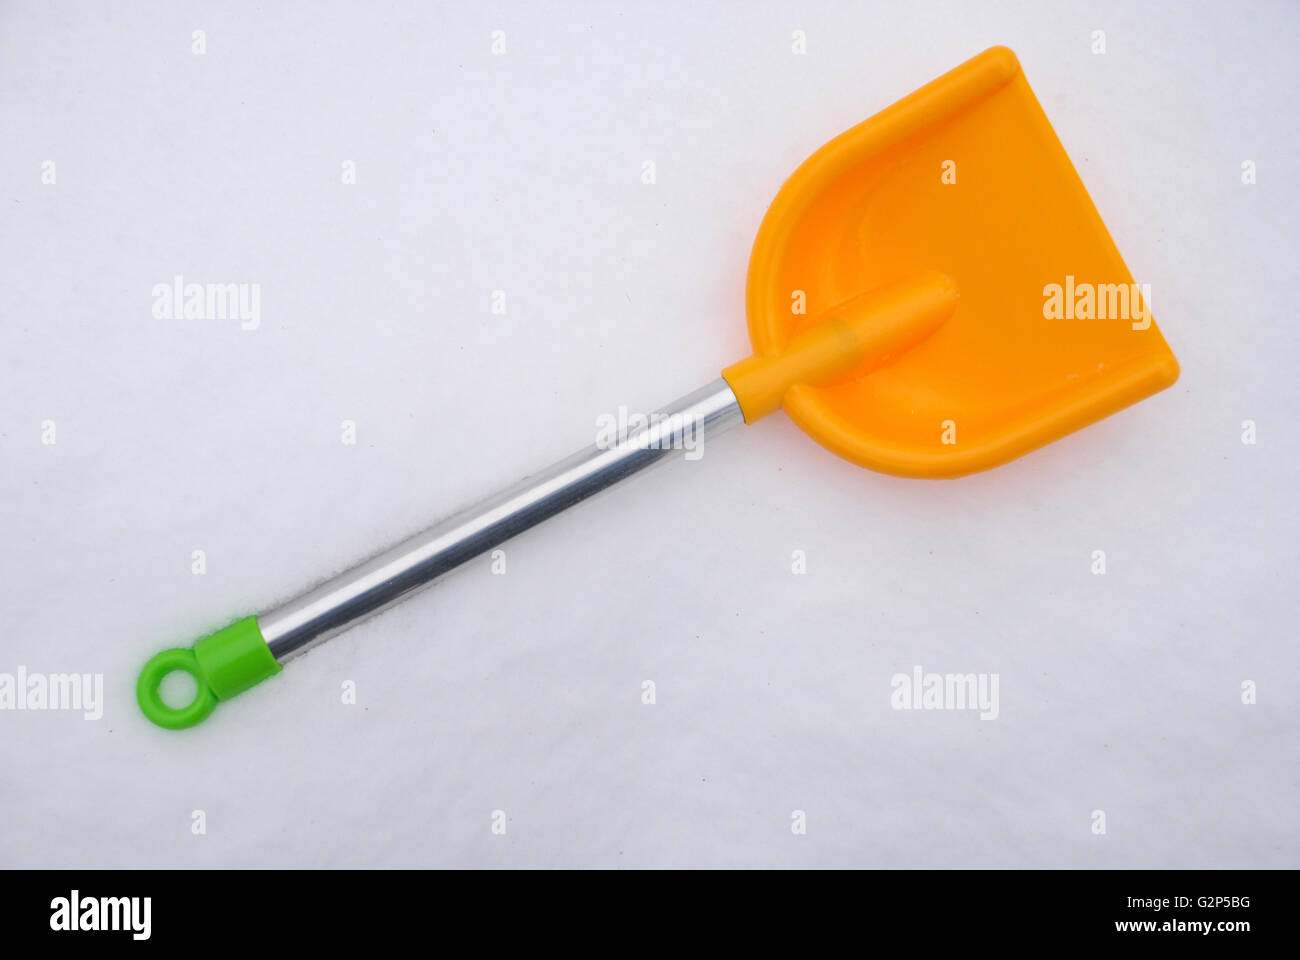 Childrens shovel into a snow. Children toy shovel with snow on background. Stock Photo